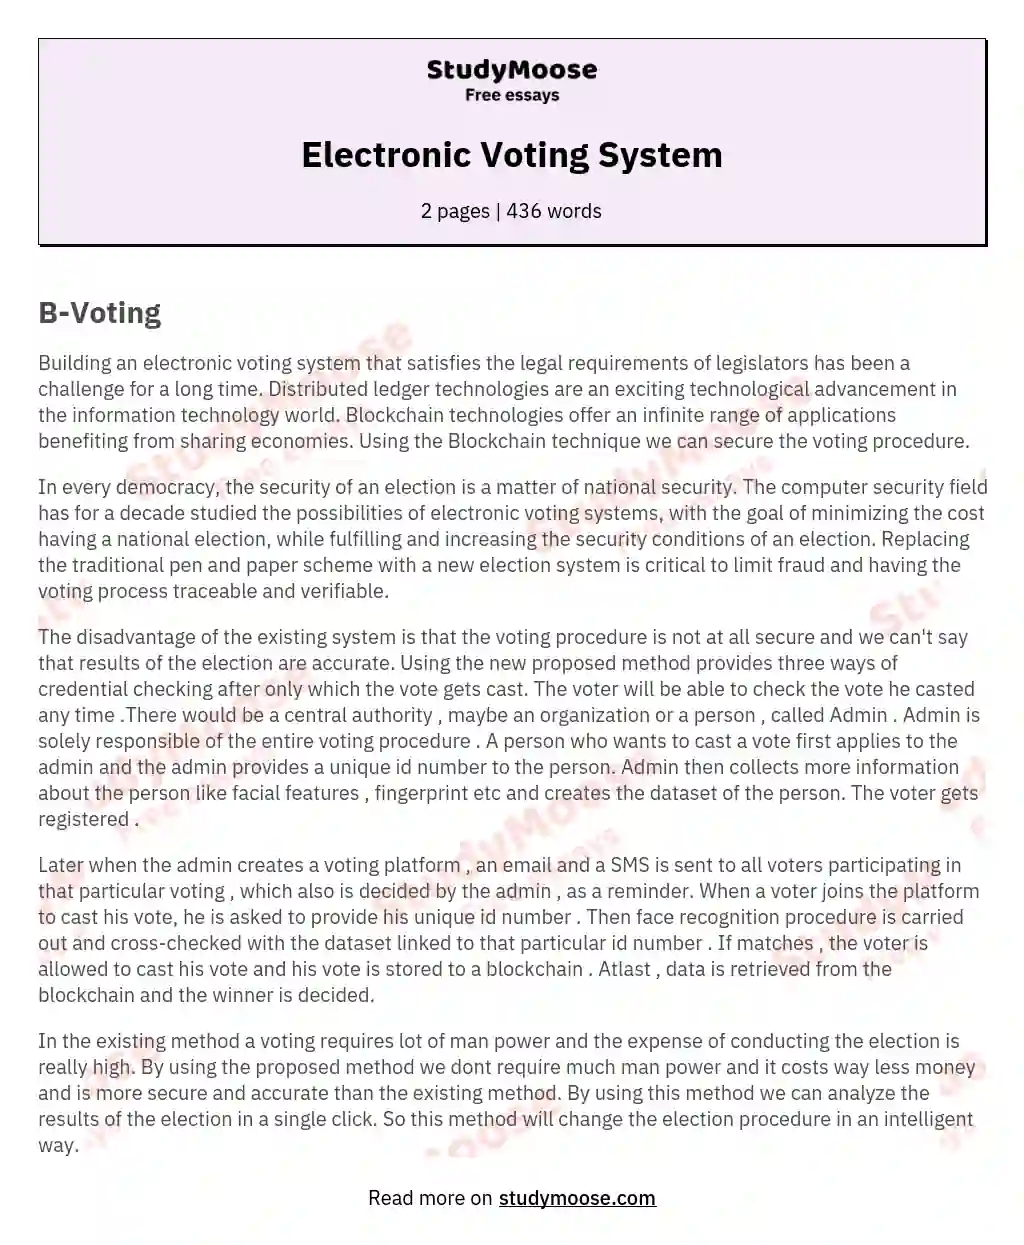 Electronic Voting System essay